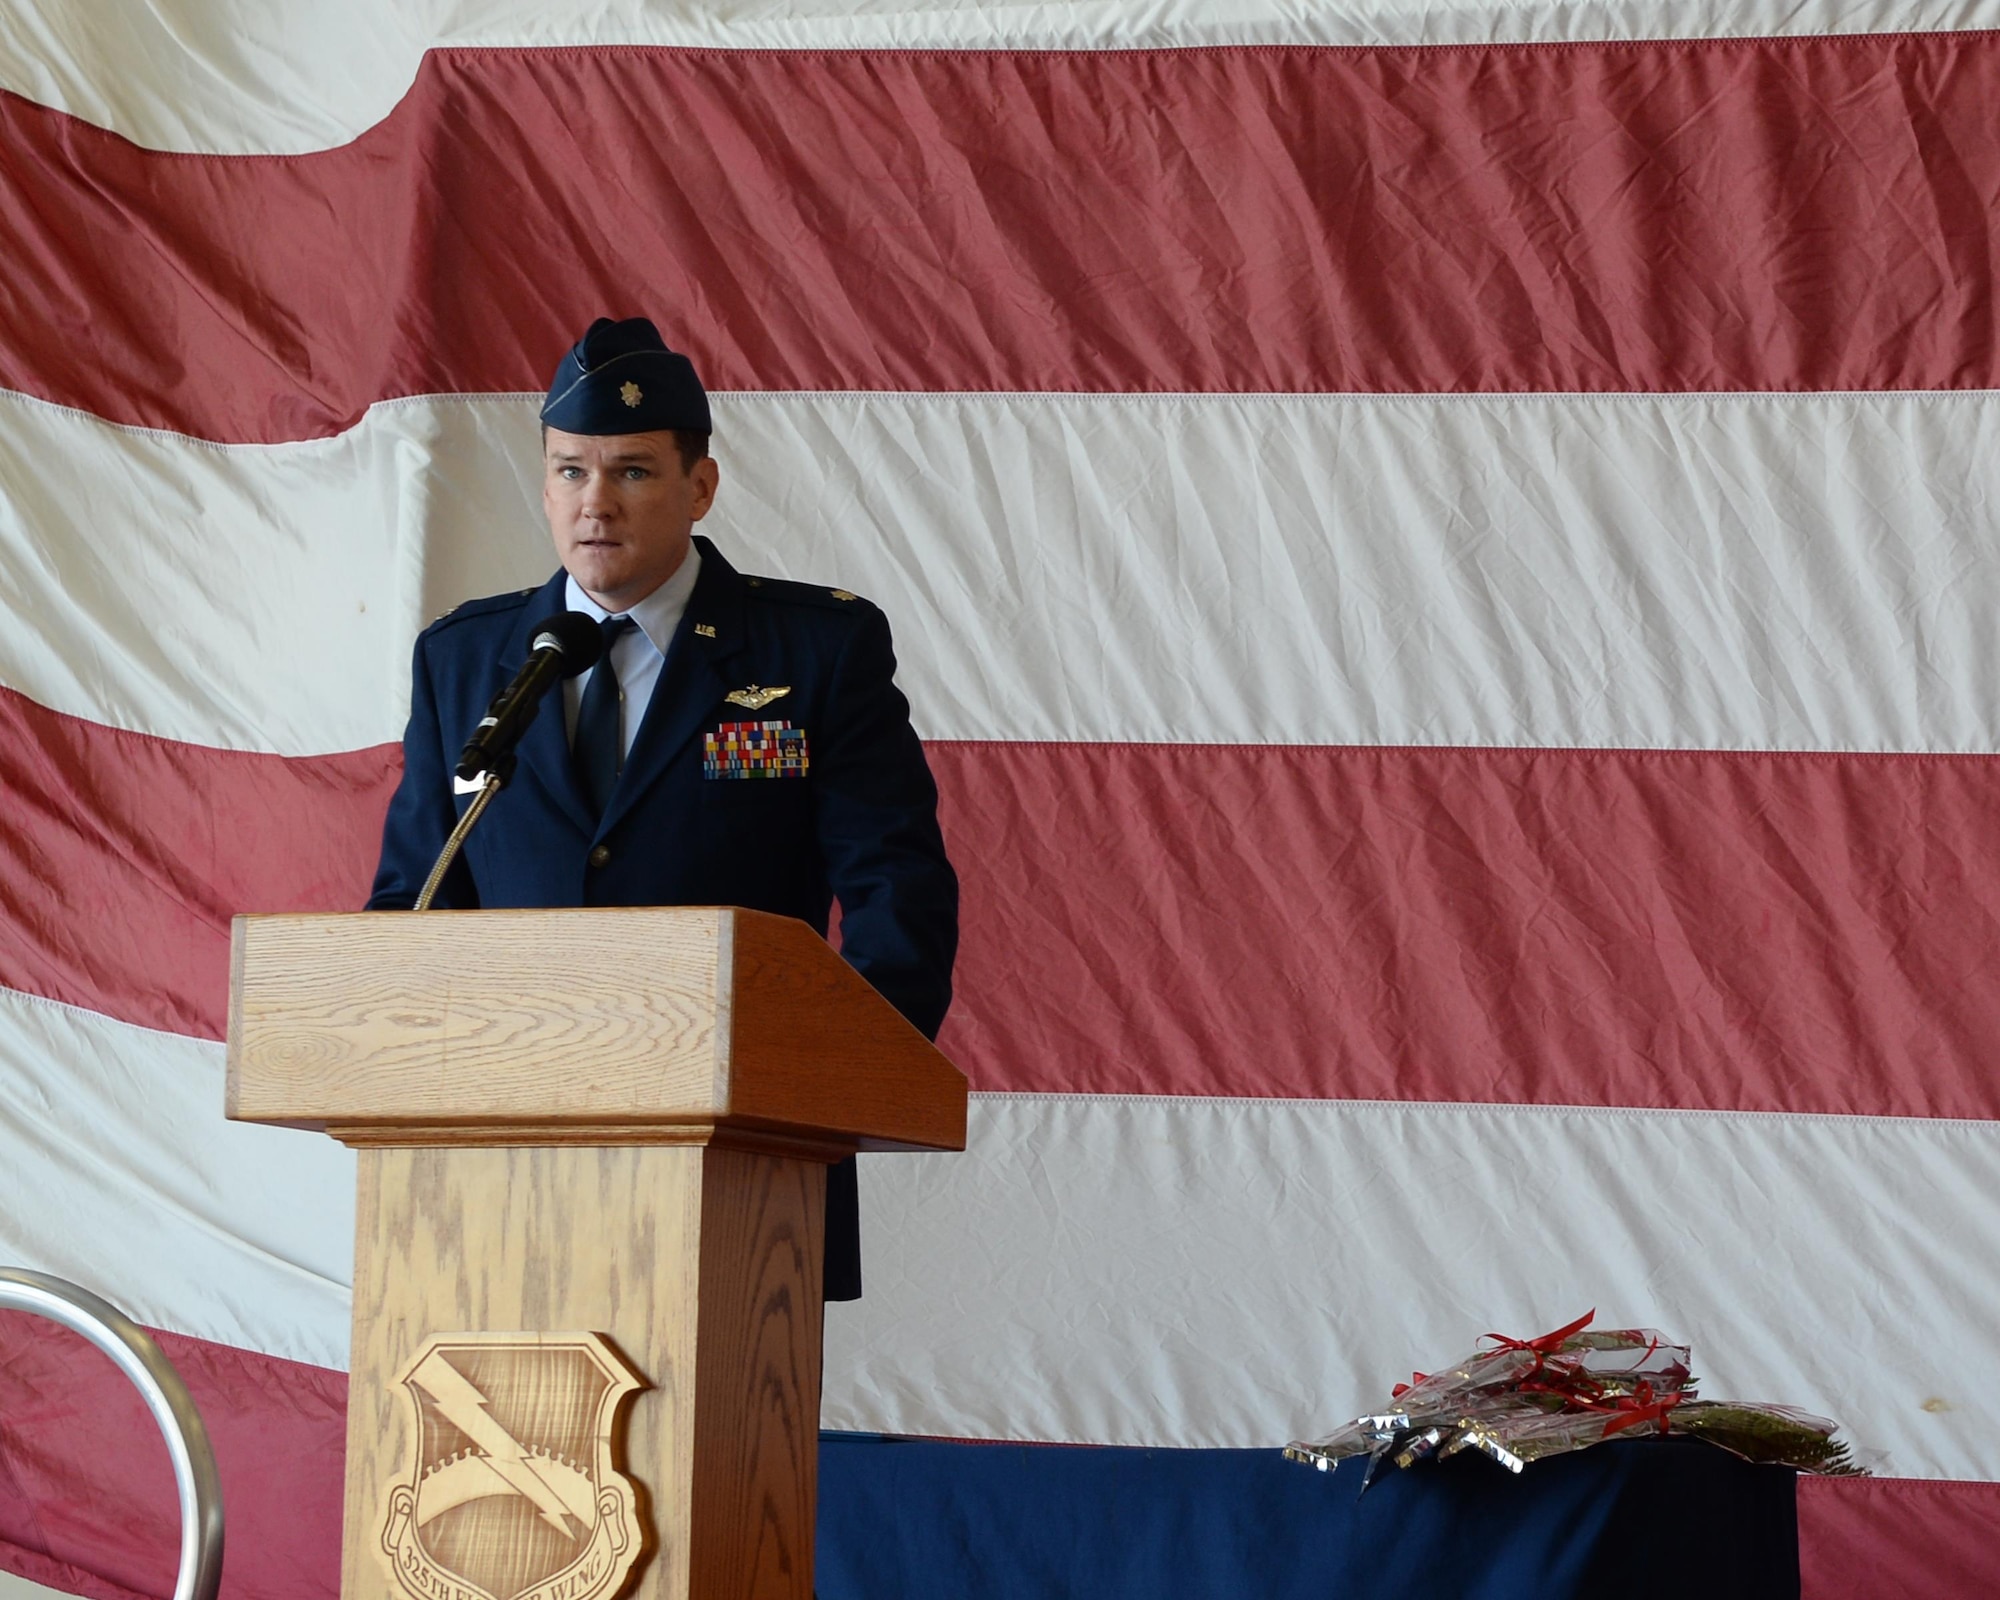 Col. Keith McGuire, incoming commander 337th Air Control Squadron, addresses his new squadron at the 337th ACS change of command ceremony at Tyndall Air Force Base, Fla., May 5, 2016. McGuire received his commission from the Citadel in Charleston, South Carolina in May of 2000 and has more than 1,100 hours of operational experience on the E-8C Joint Surveillance Target Attack Radar System. (U.S. Air Force photo/Airman 1st Class Cody R. Miller)